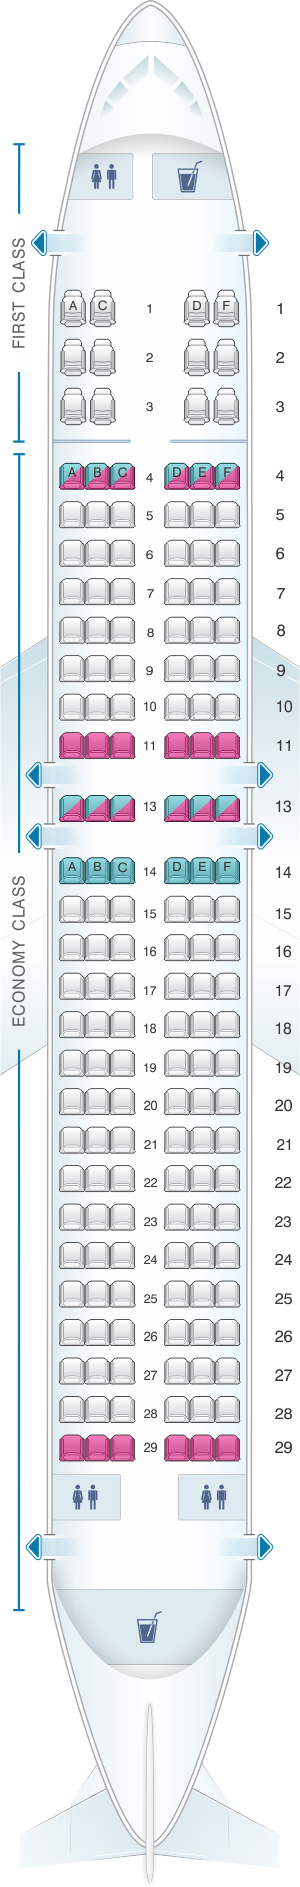 Seat map for Sun Country Airlines Boeing B737 800 162pax